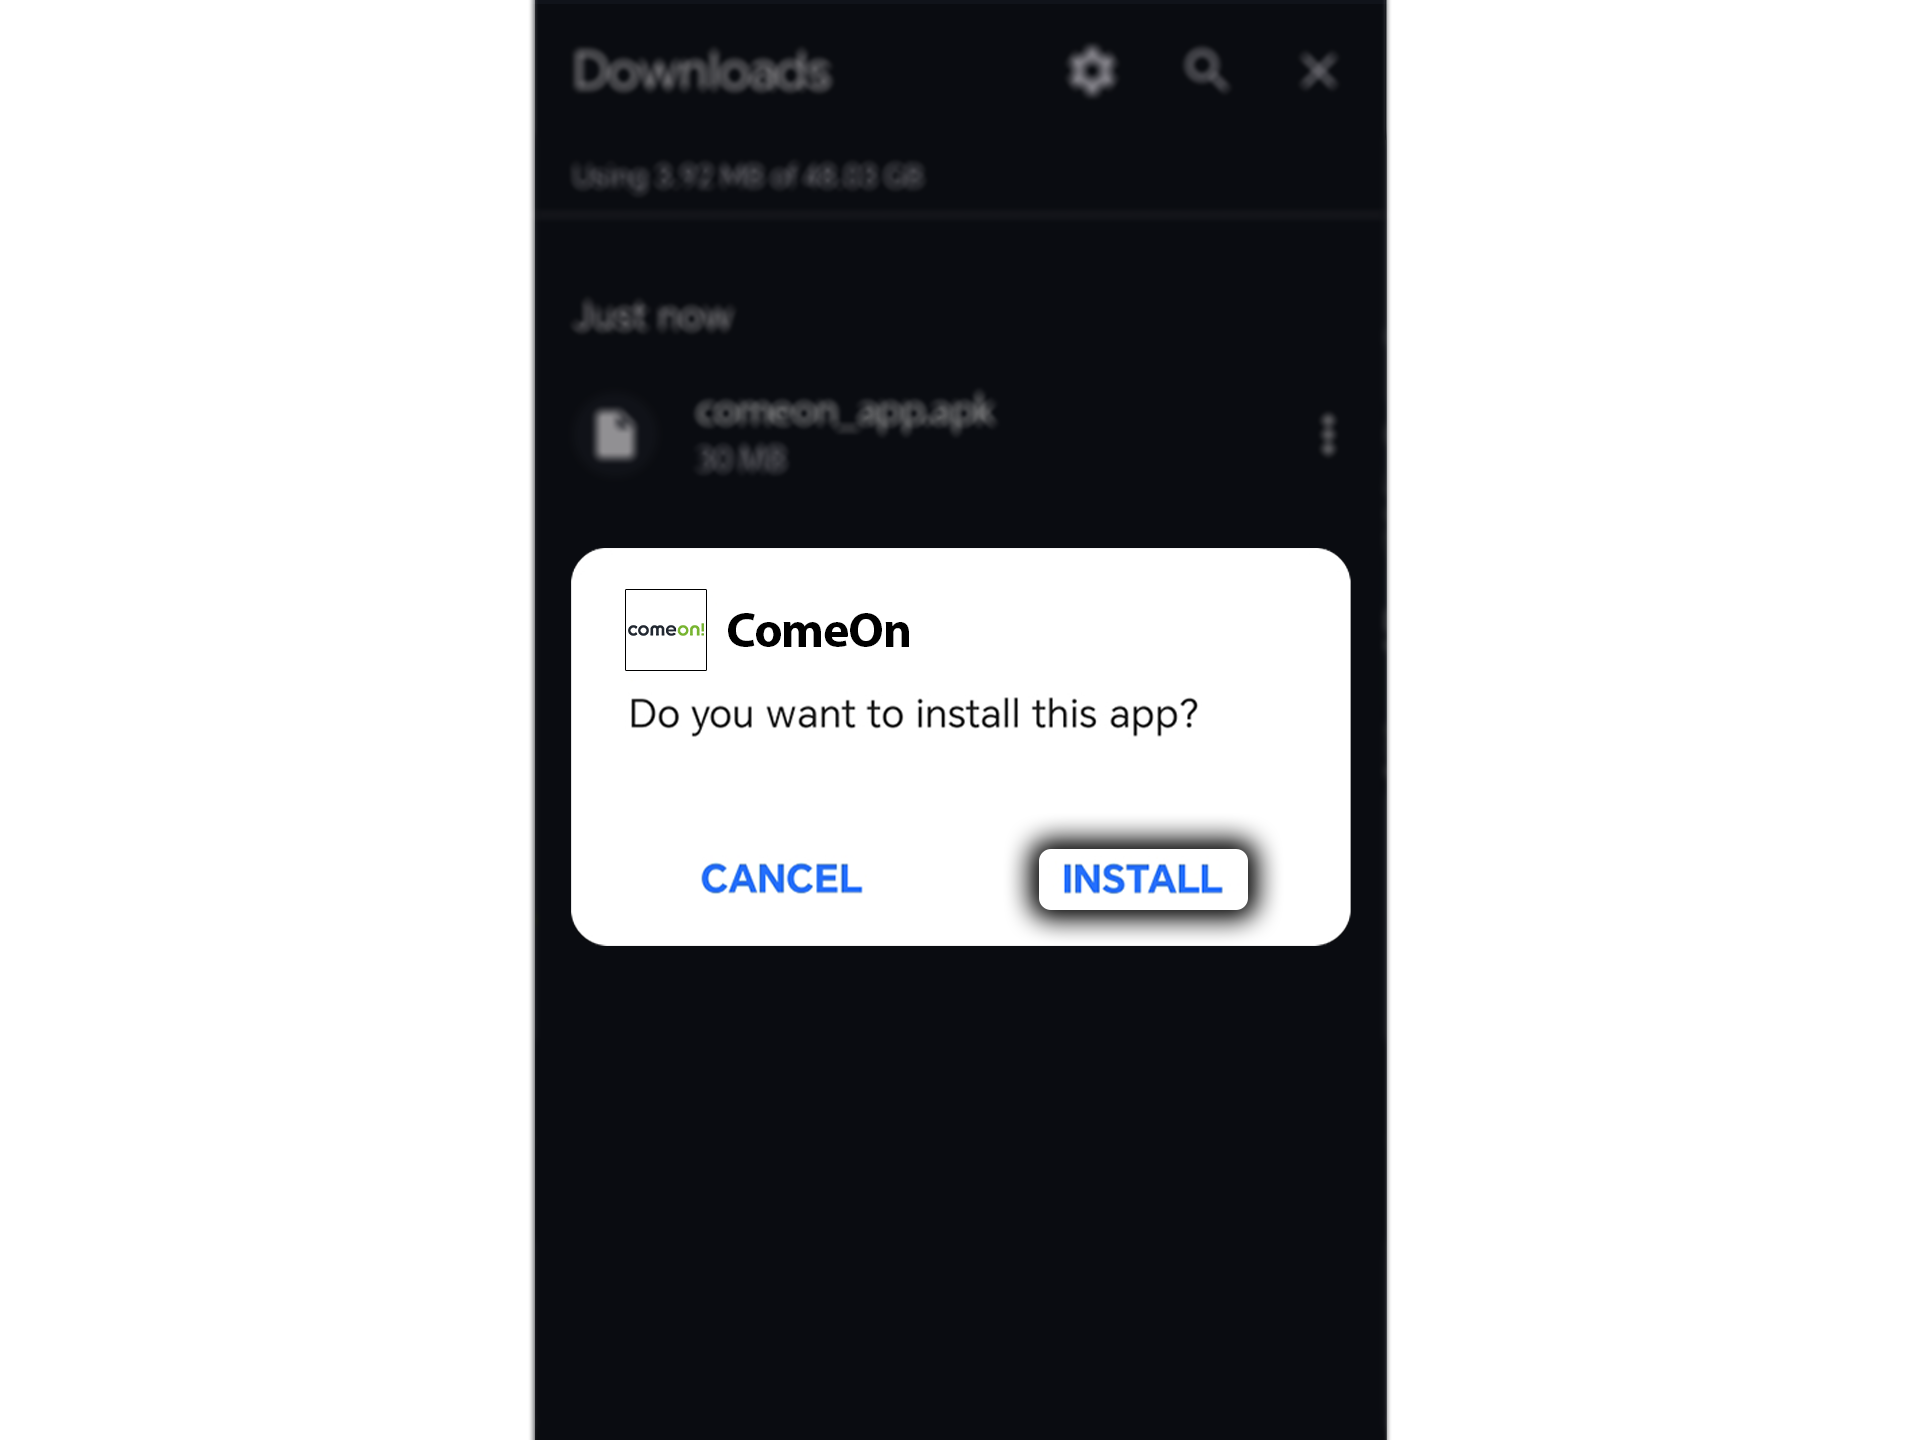 Go to your downloads folder and confirm the installation of the ComeOn app.